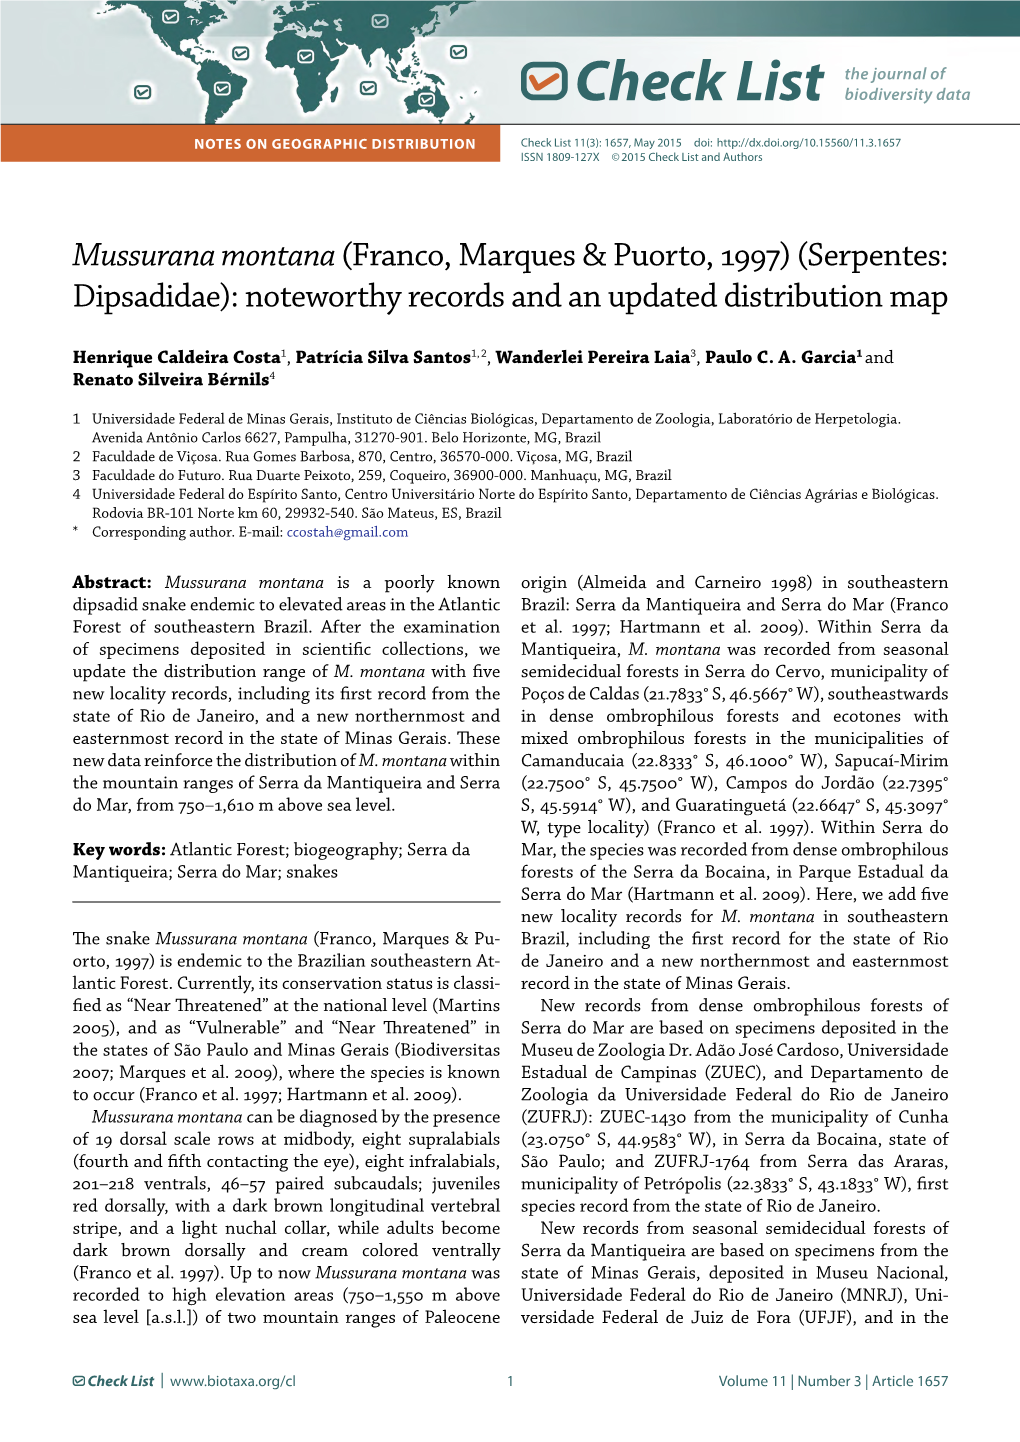 Mussurana Montana (Franco, Marques & Puorto, 1997) (Serpentes: Dipsadidae): Noteworthy Records and an Updated Distribution Map